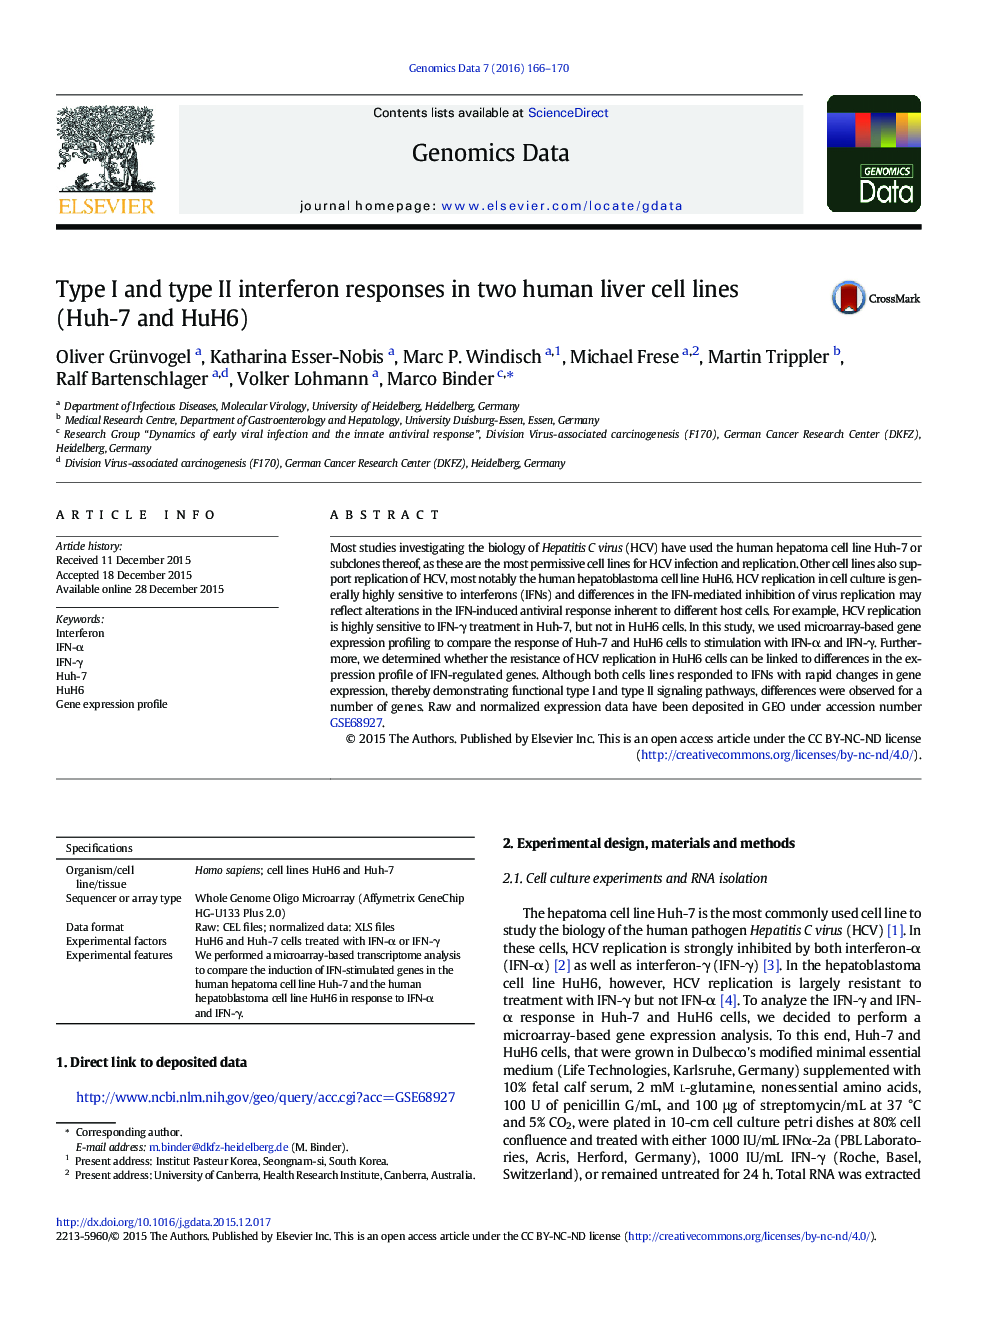 Type I and type II interferon responses in two human liver cell lines (Huh-7 and HuH6)